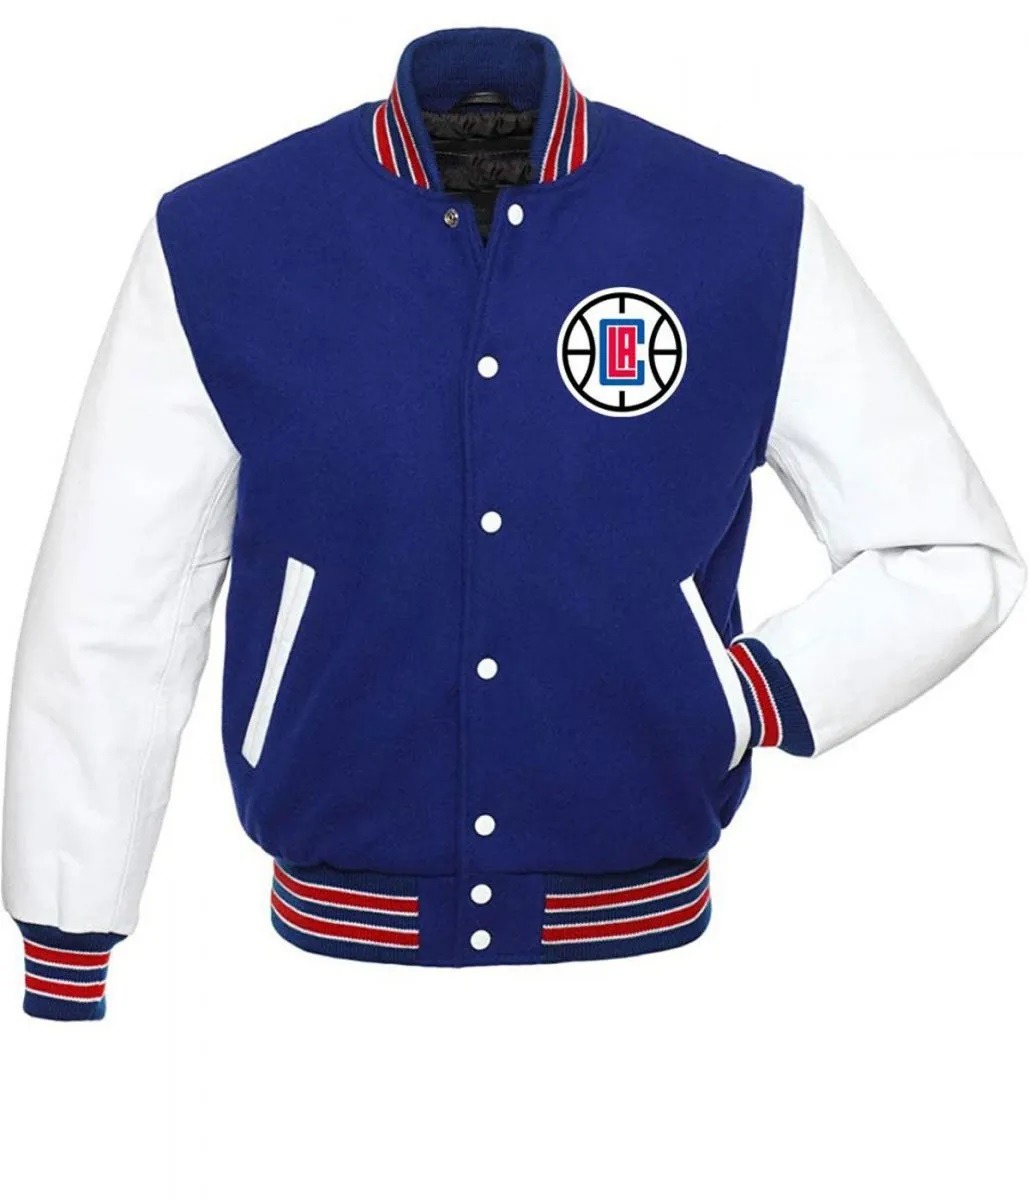 Los Angeles Clippers Basketball Blue and White Jacket